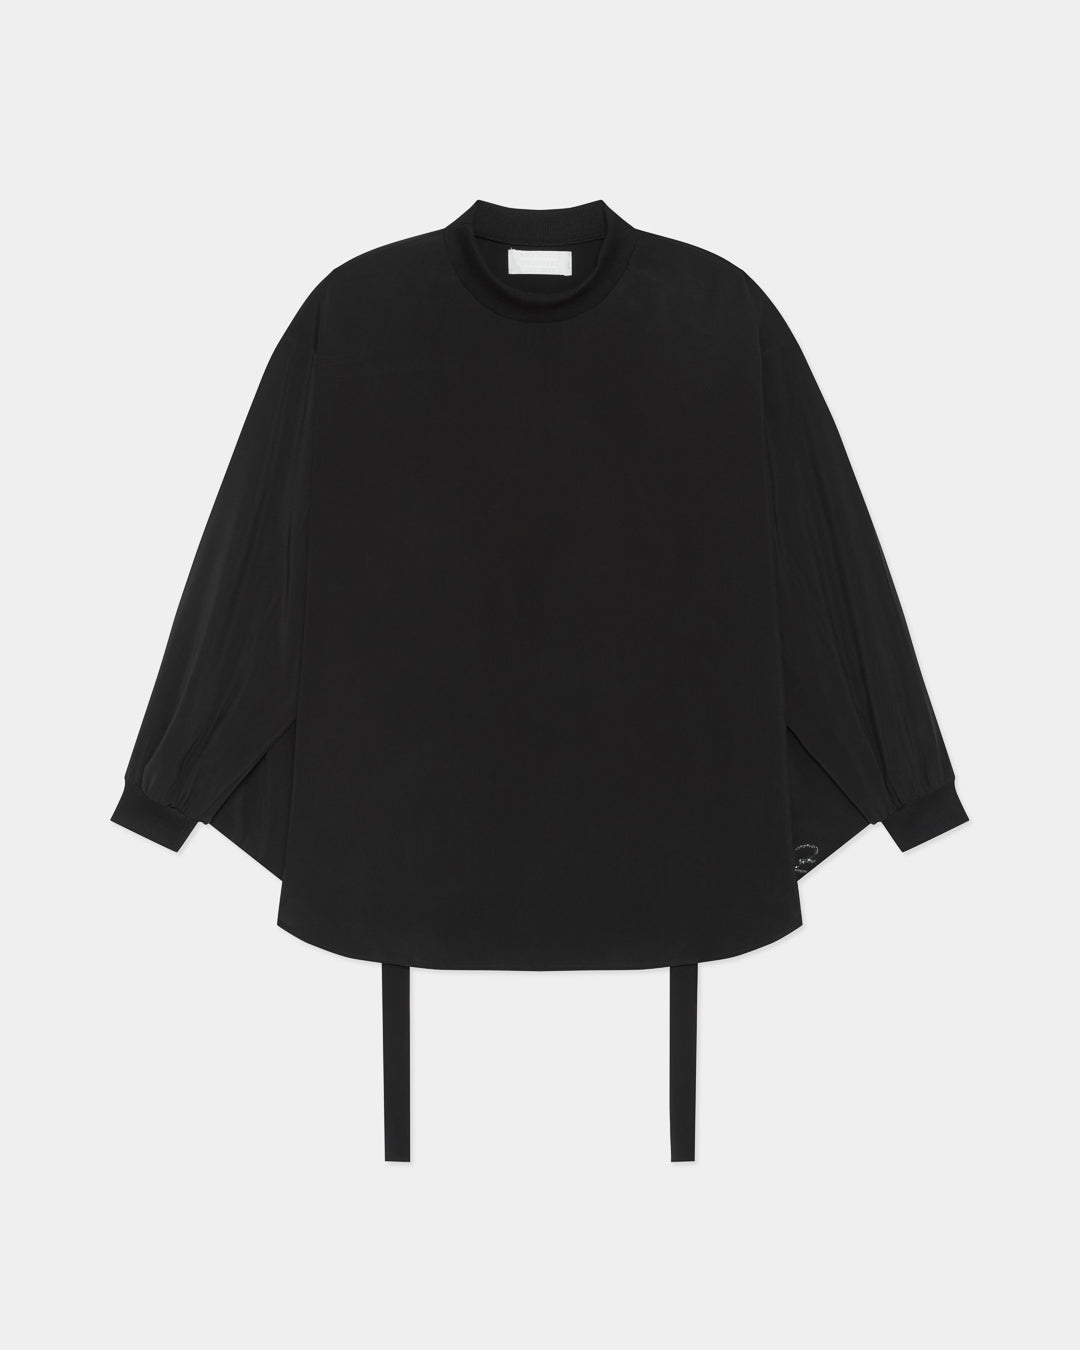 GH FLAP SOLID SWEATER